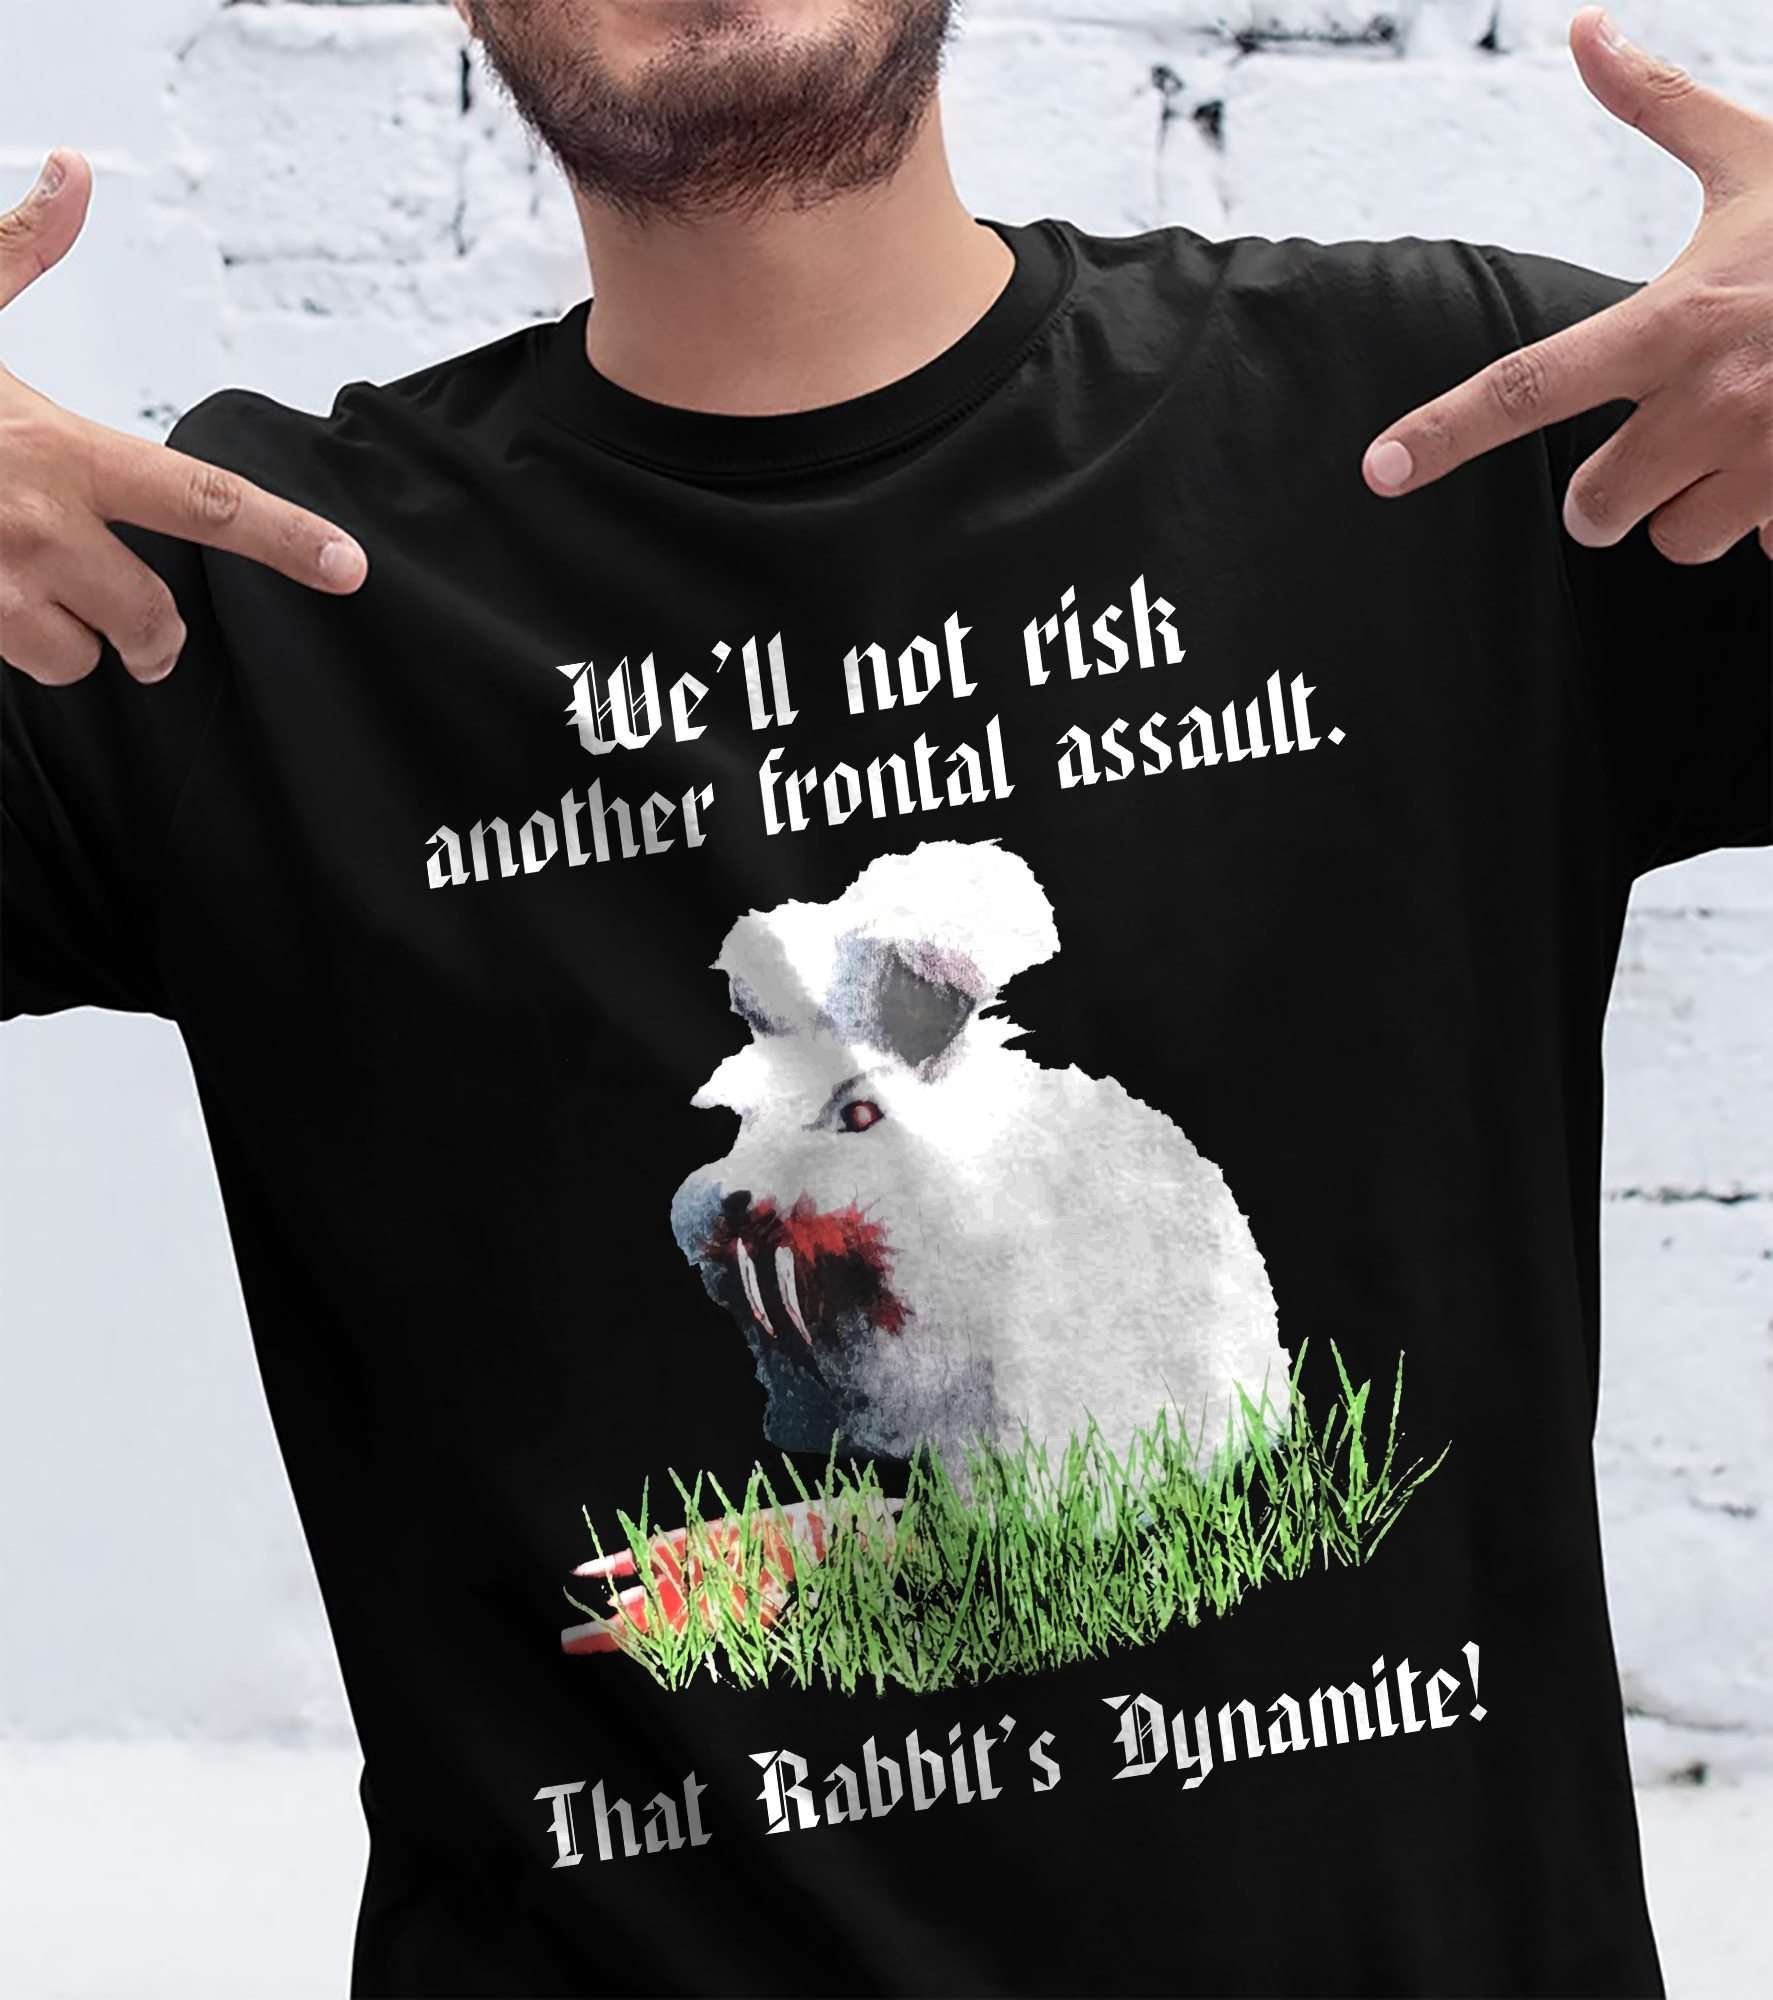 We'll not risk another frontal assault, that Rabbit's dynamite - Rabbit killer